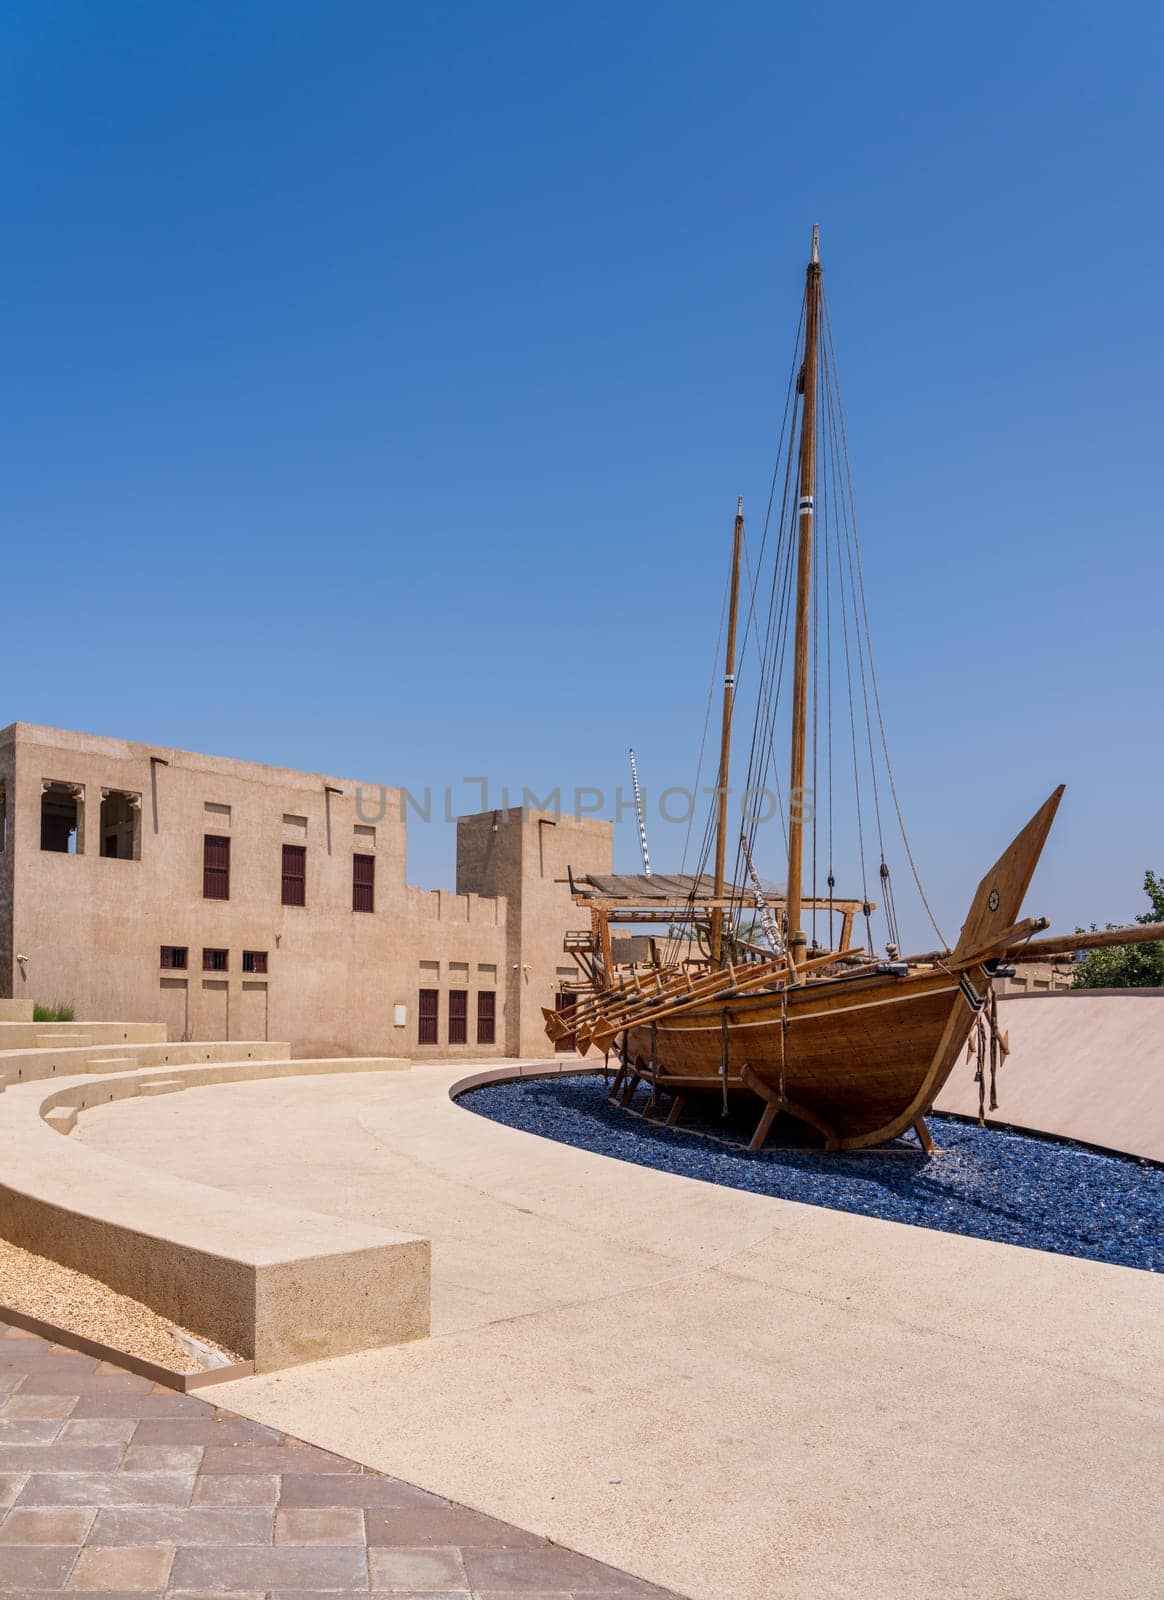 Dhow in Al Shindagha district and museum in Dubai by steheap